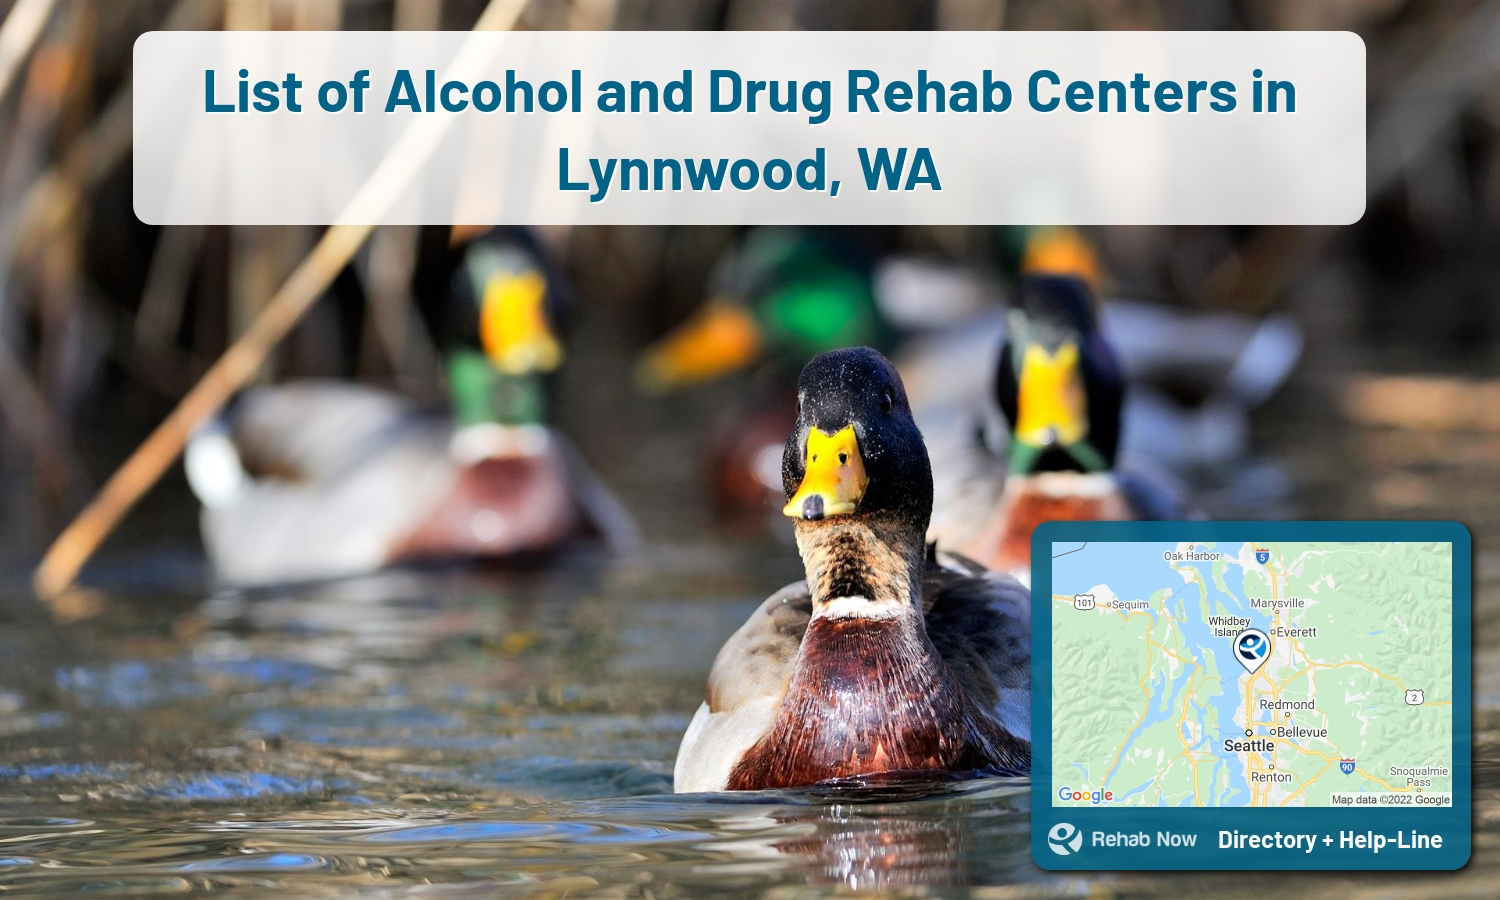 View options, availability, treatment methods, and more, for drug rehab and alcohol treatment in Lynnwood, Washington